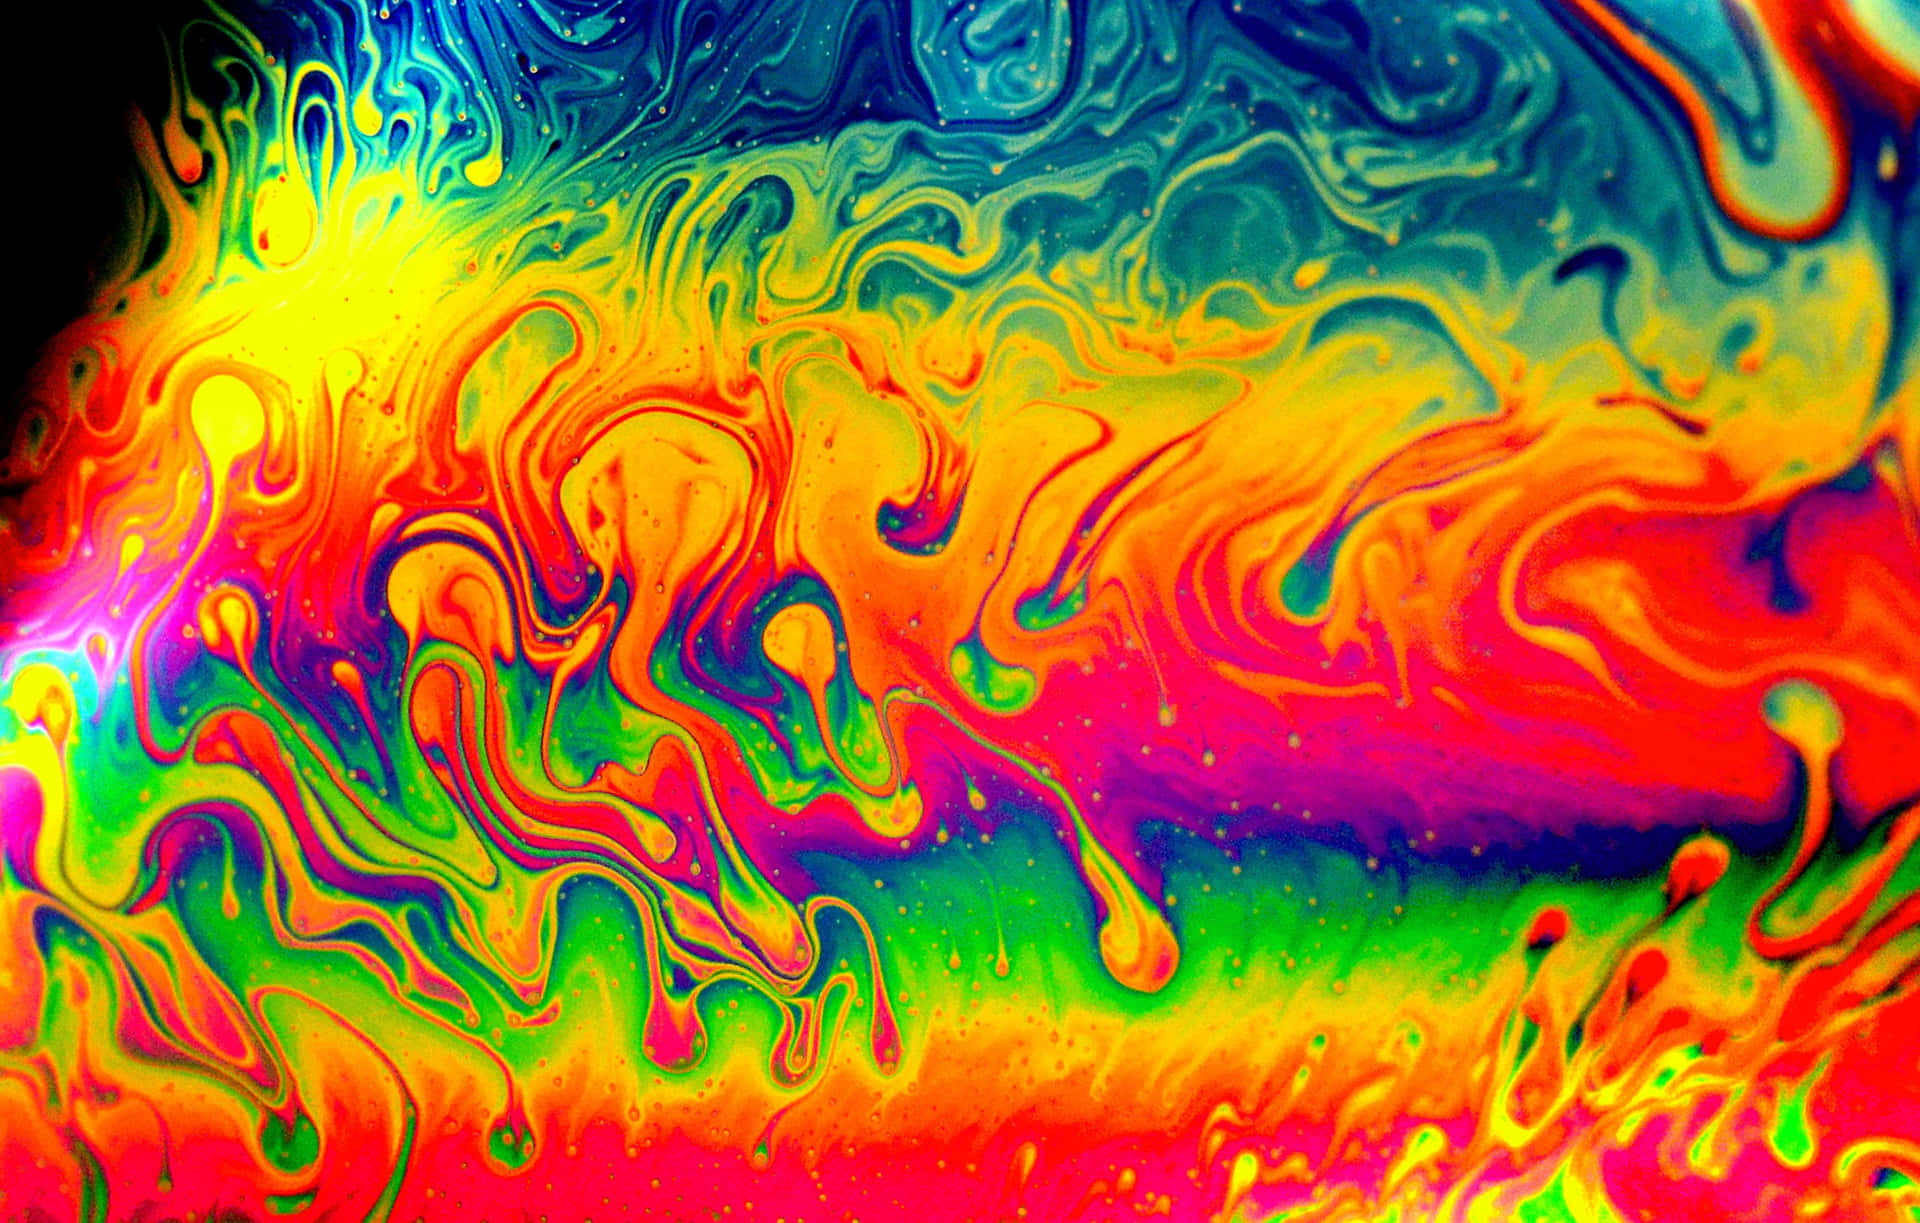 Psychedelic colors merge together in a mesmerizing display Wallpaper